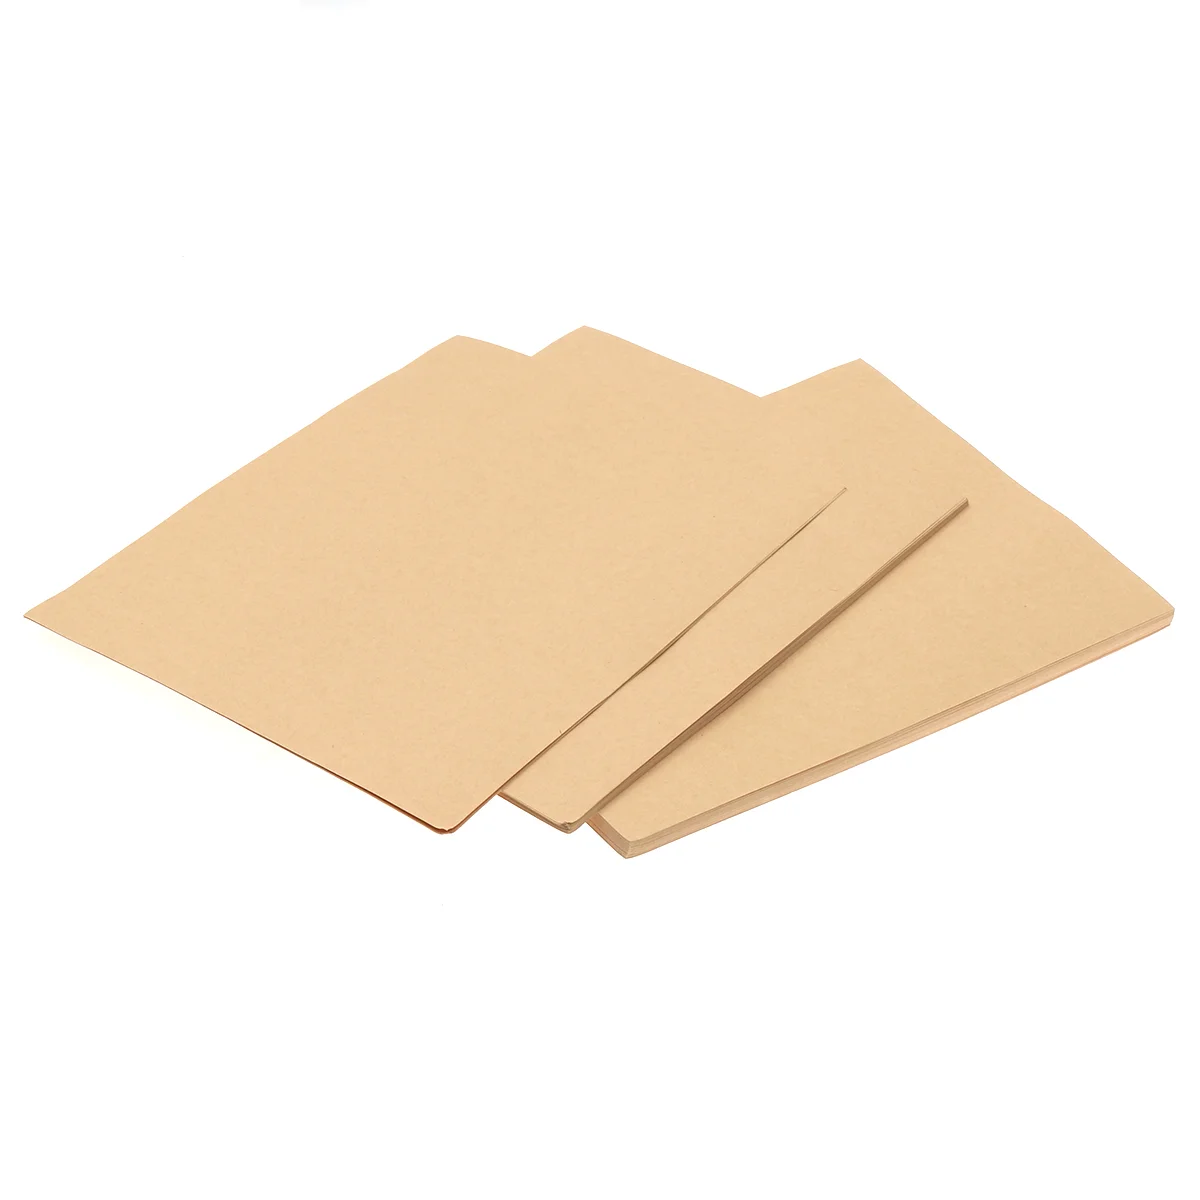 A4 Vintage Blank Kraft Letter Paper Retro Writing Papers A5 Lined Stationery Paper Letter Sets